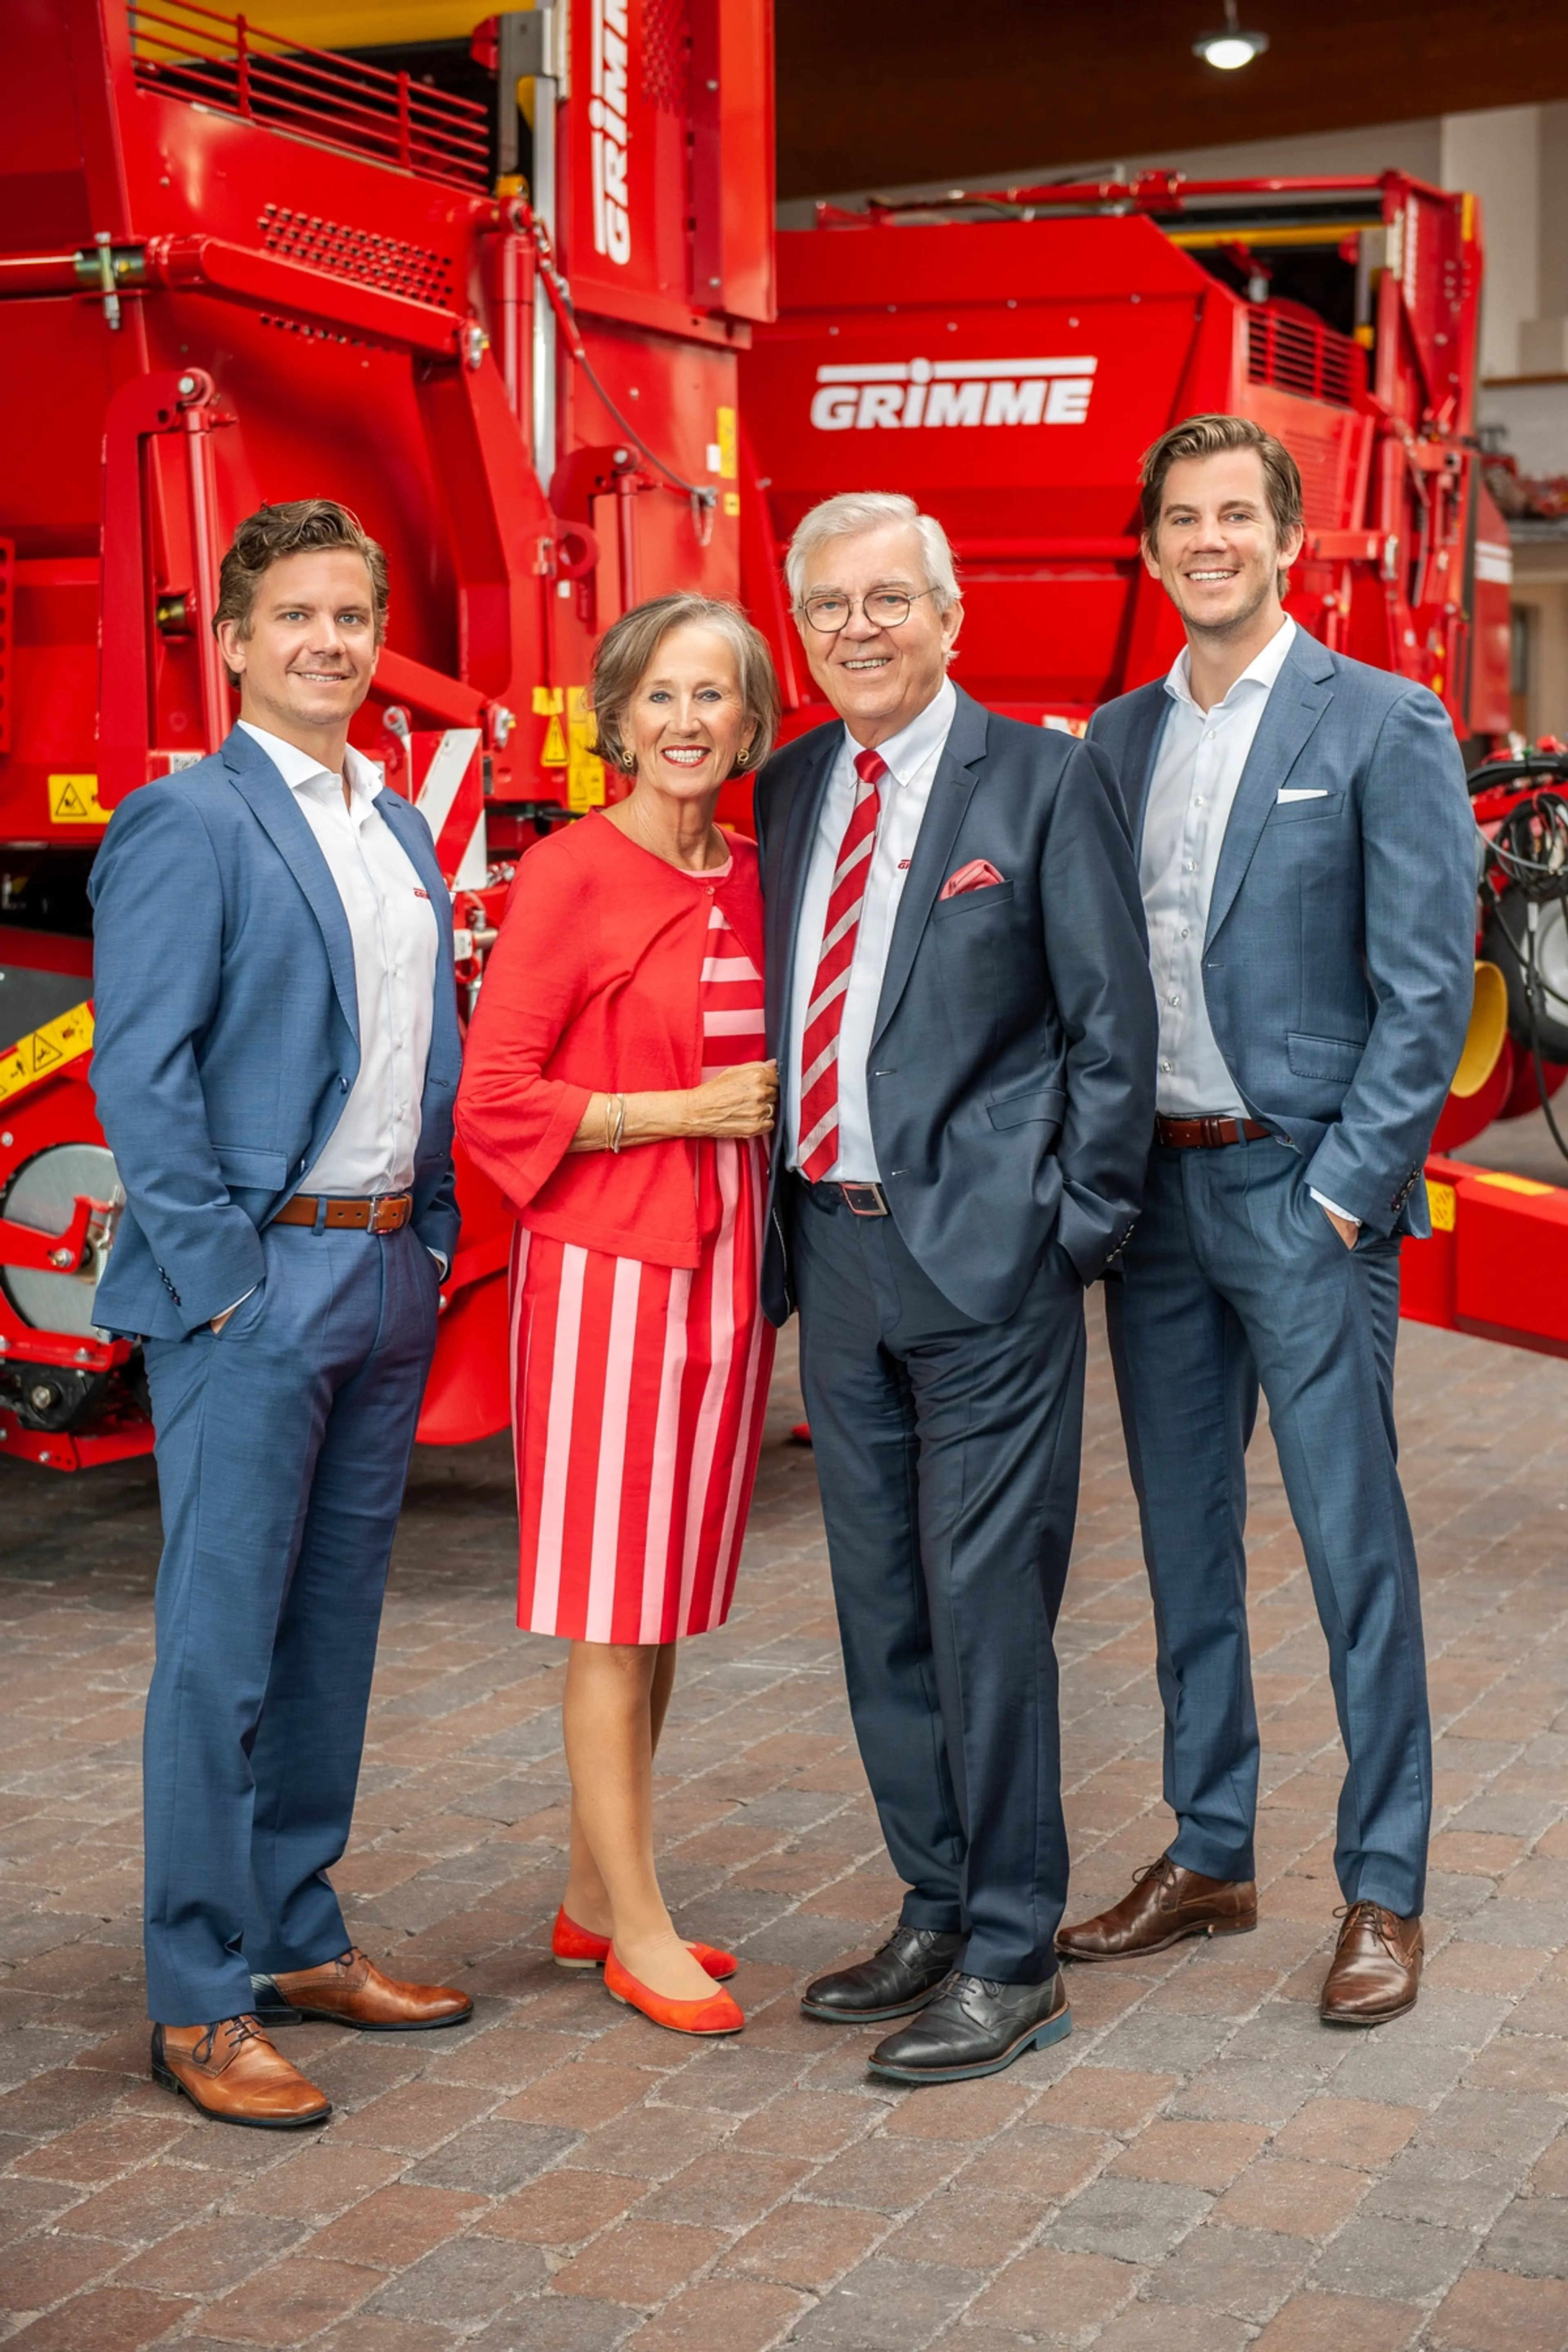 The GRIMME family in front of a potato harvester, type EVO 280.